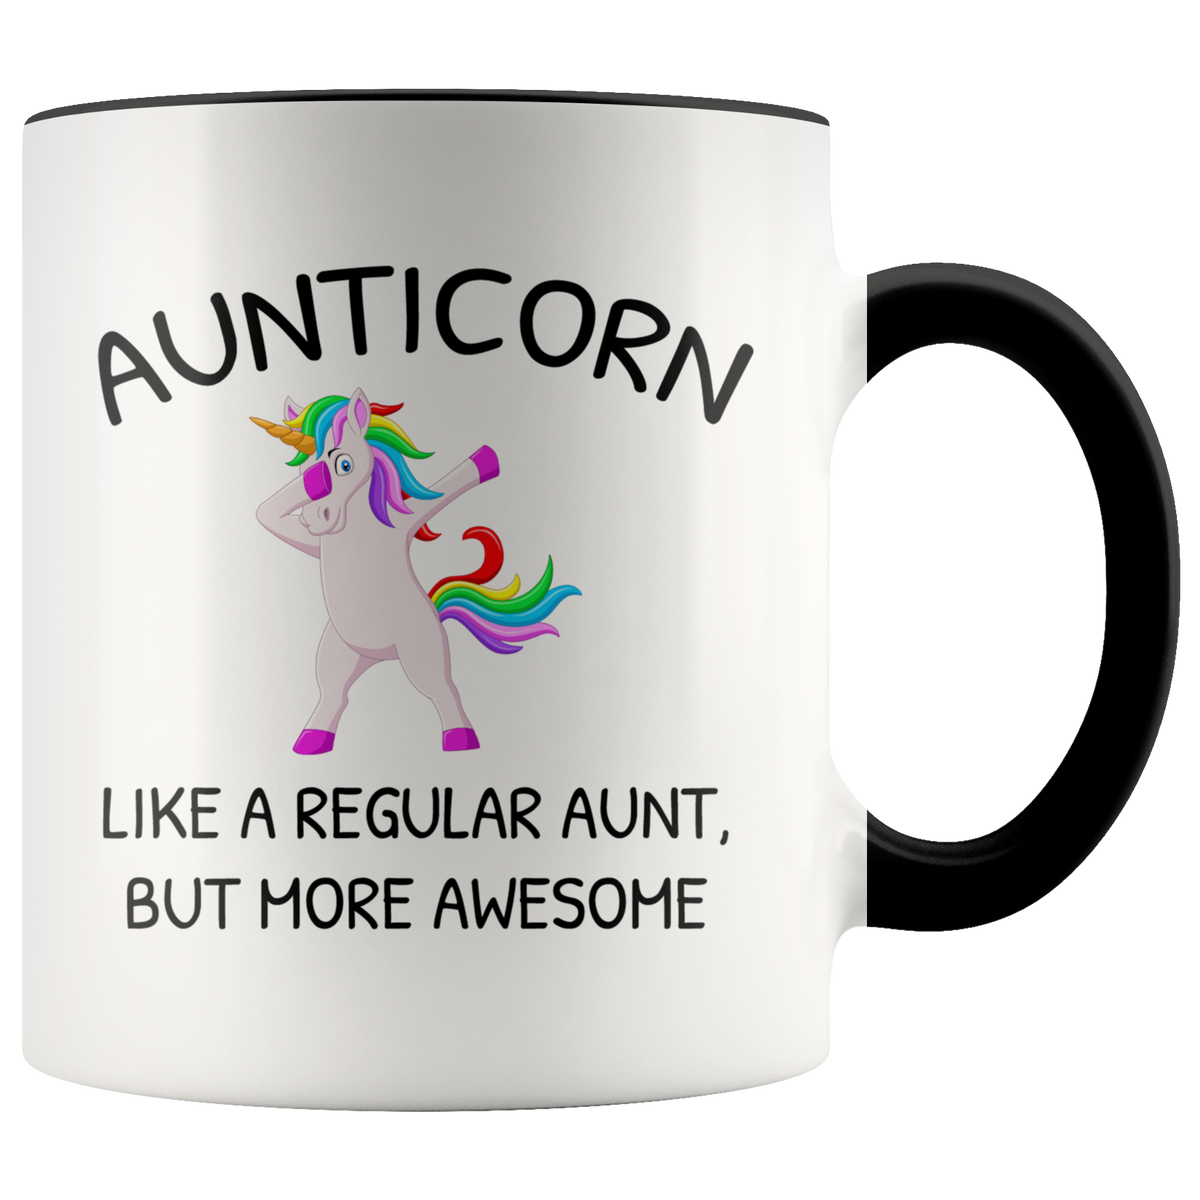 Funny Aunt Mug Gift - Aunticorn Like A Regular Aunt But More Awesome Accent Coffee Mug 11oz